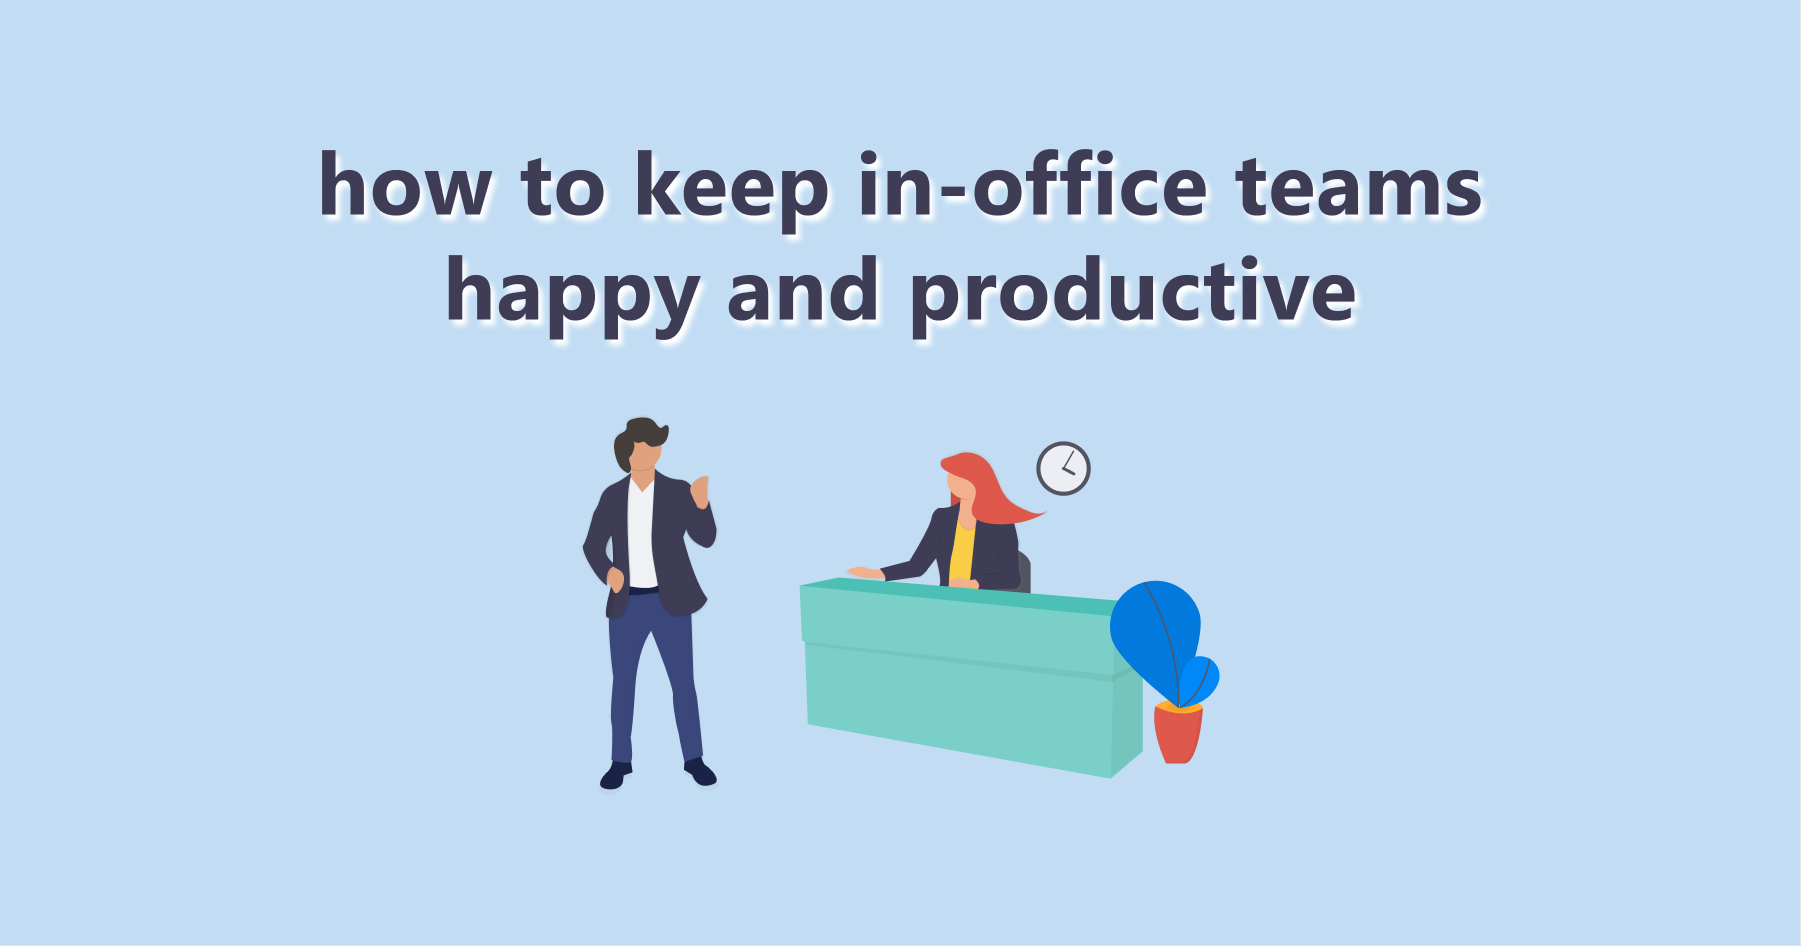 7 Ways To Keep In-Office Teams Happy and Productive